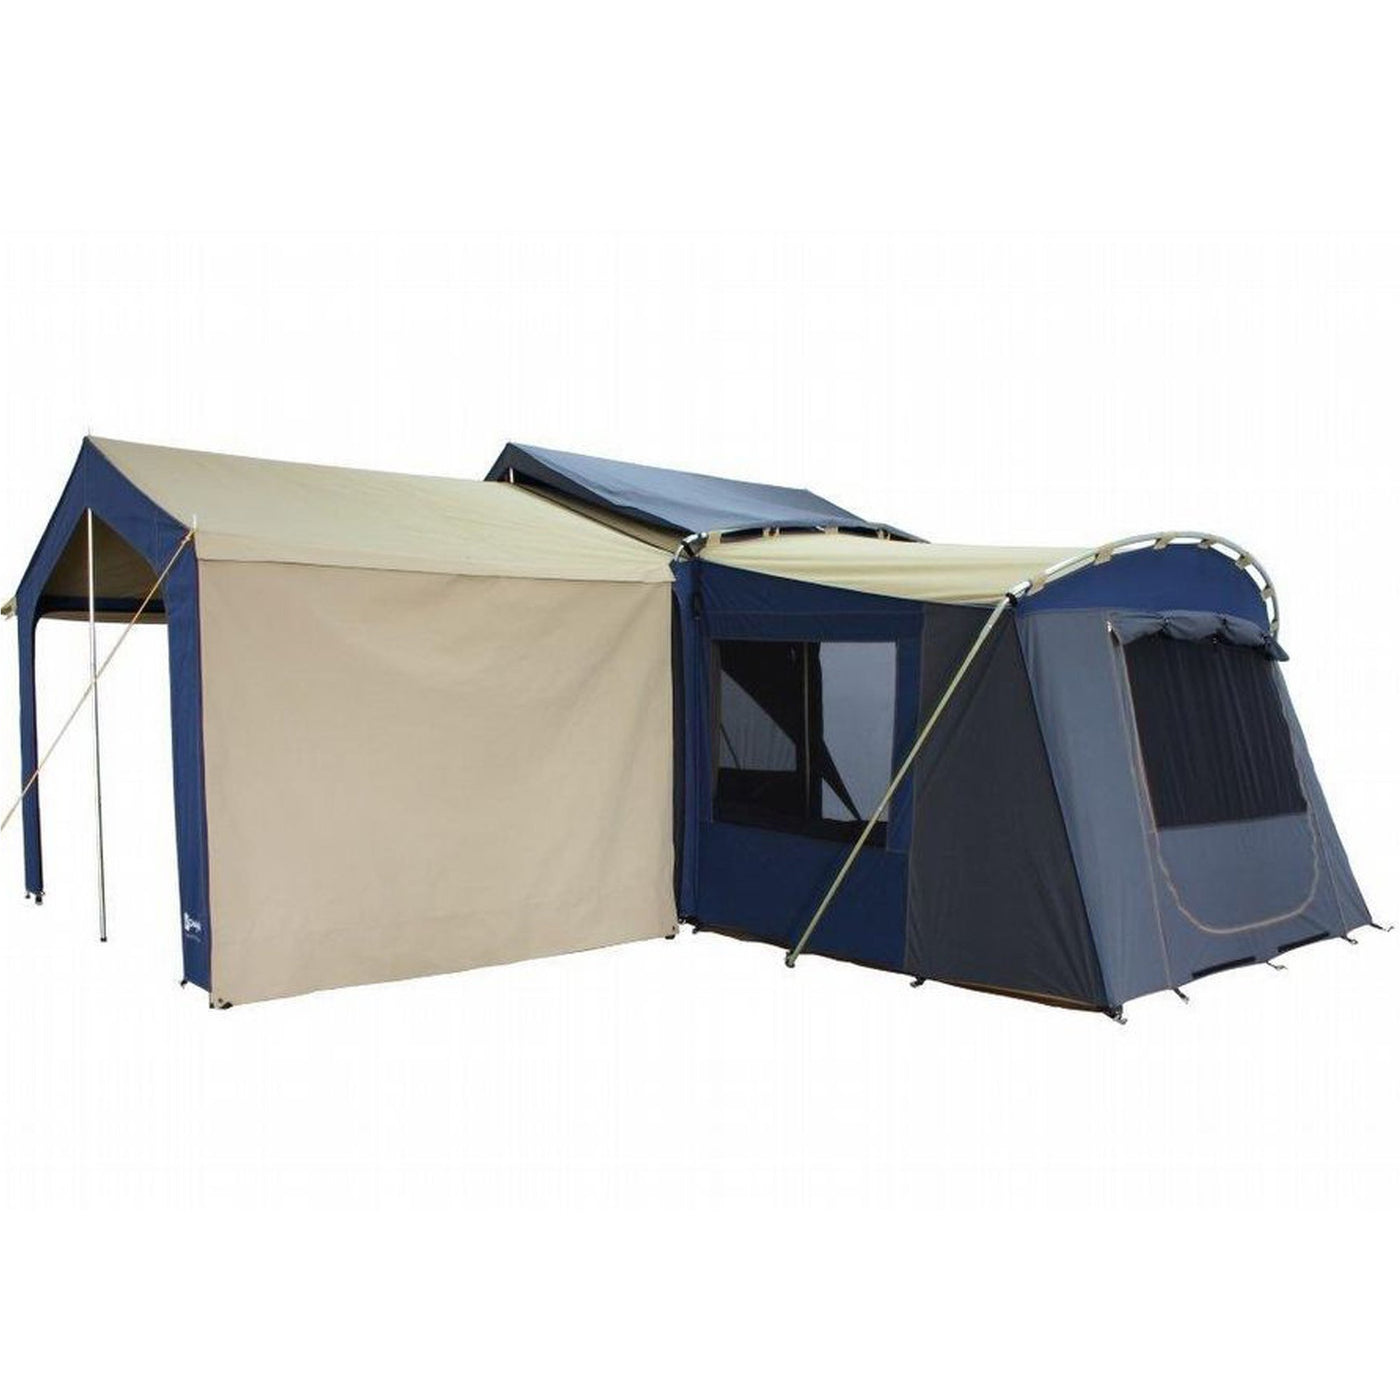 The Optional veranda awning can also be pegged down and used as a windbreak.